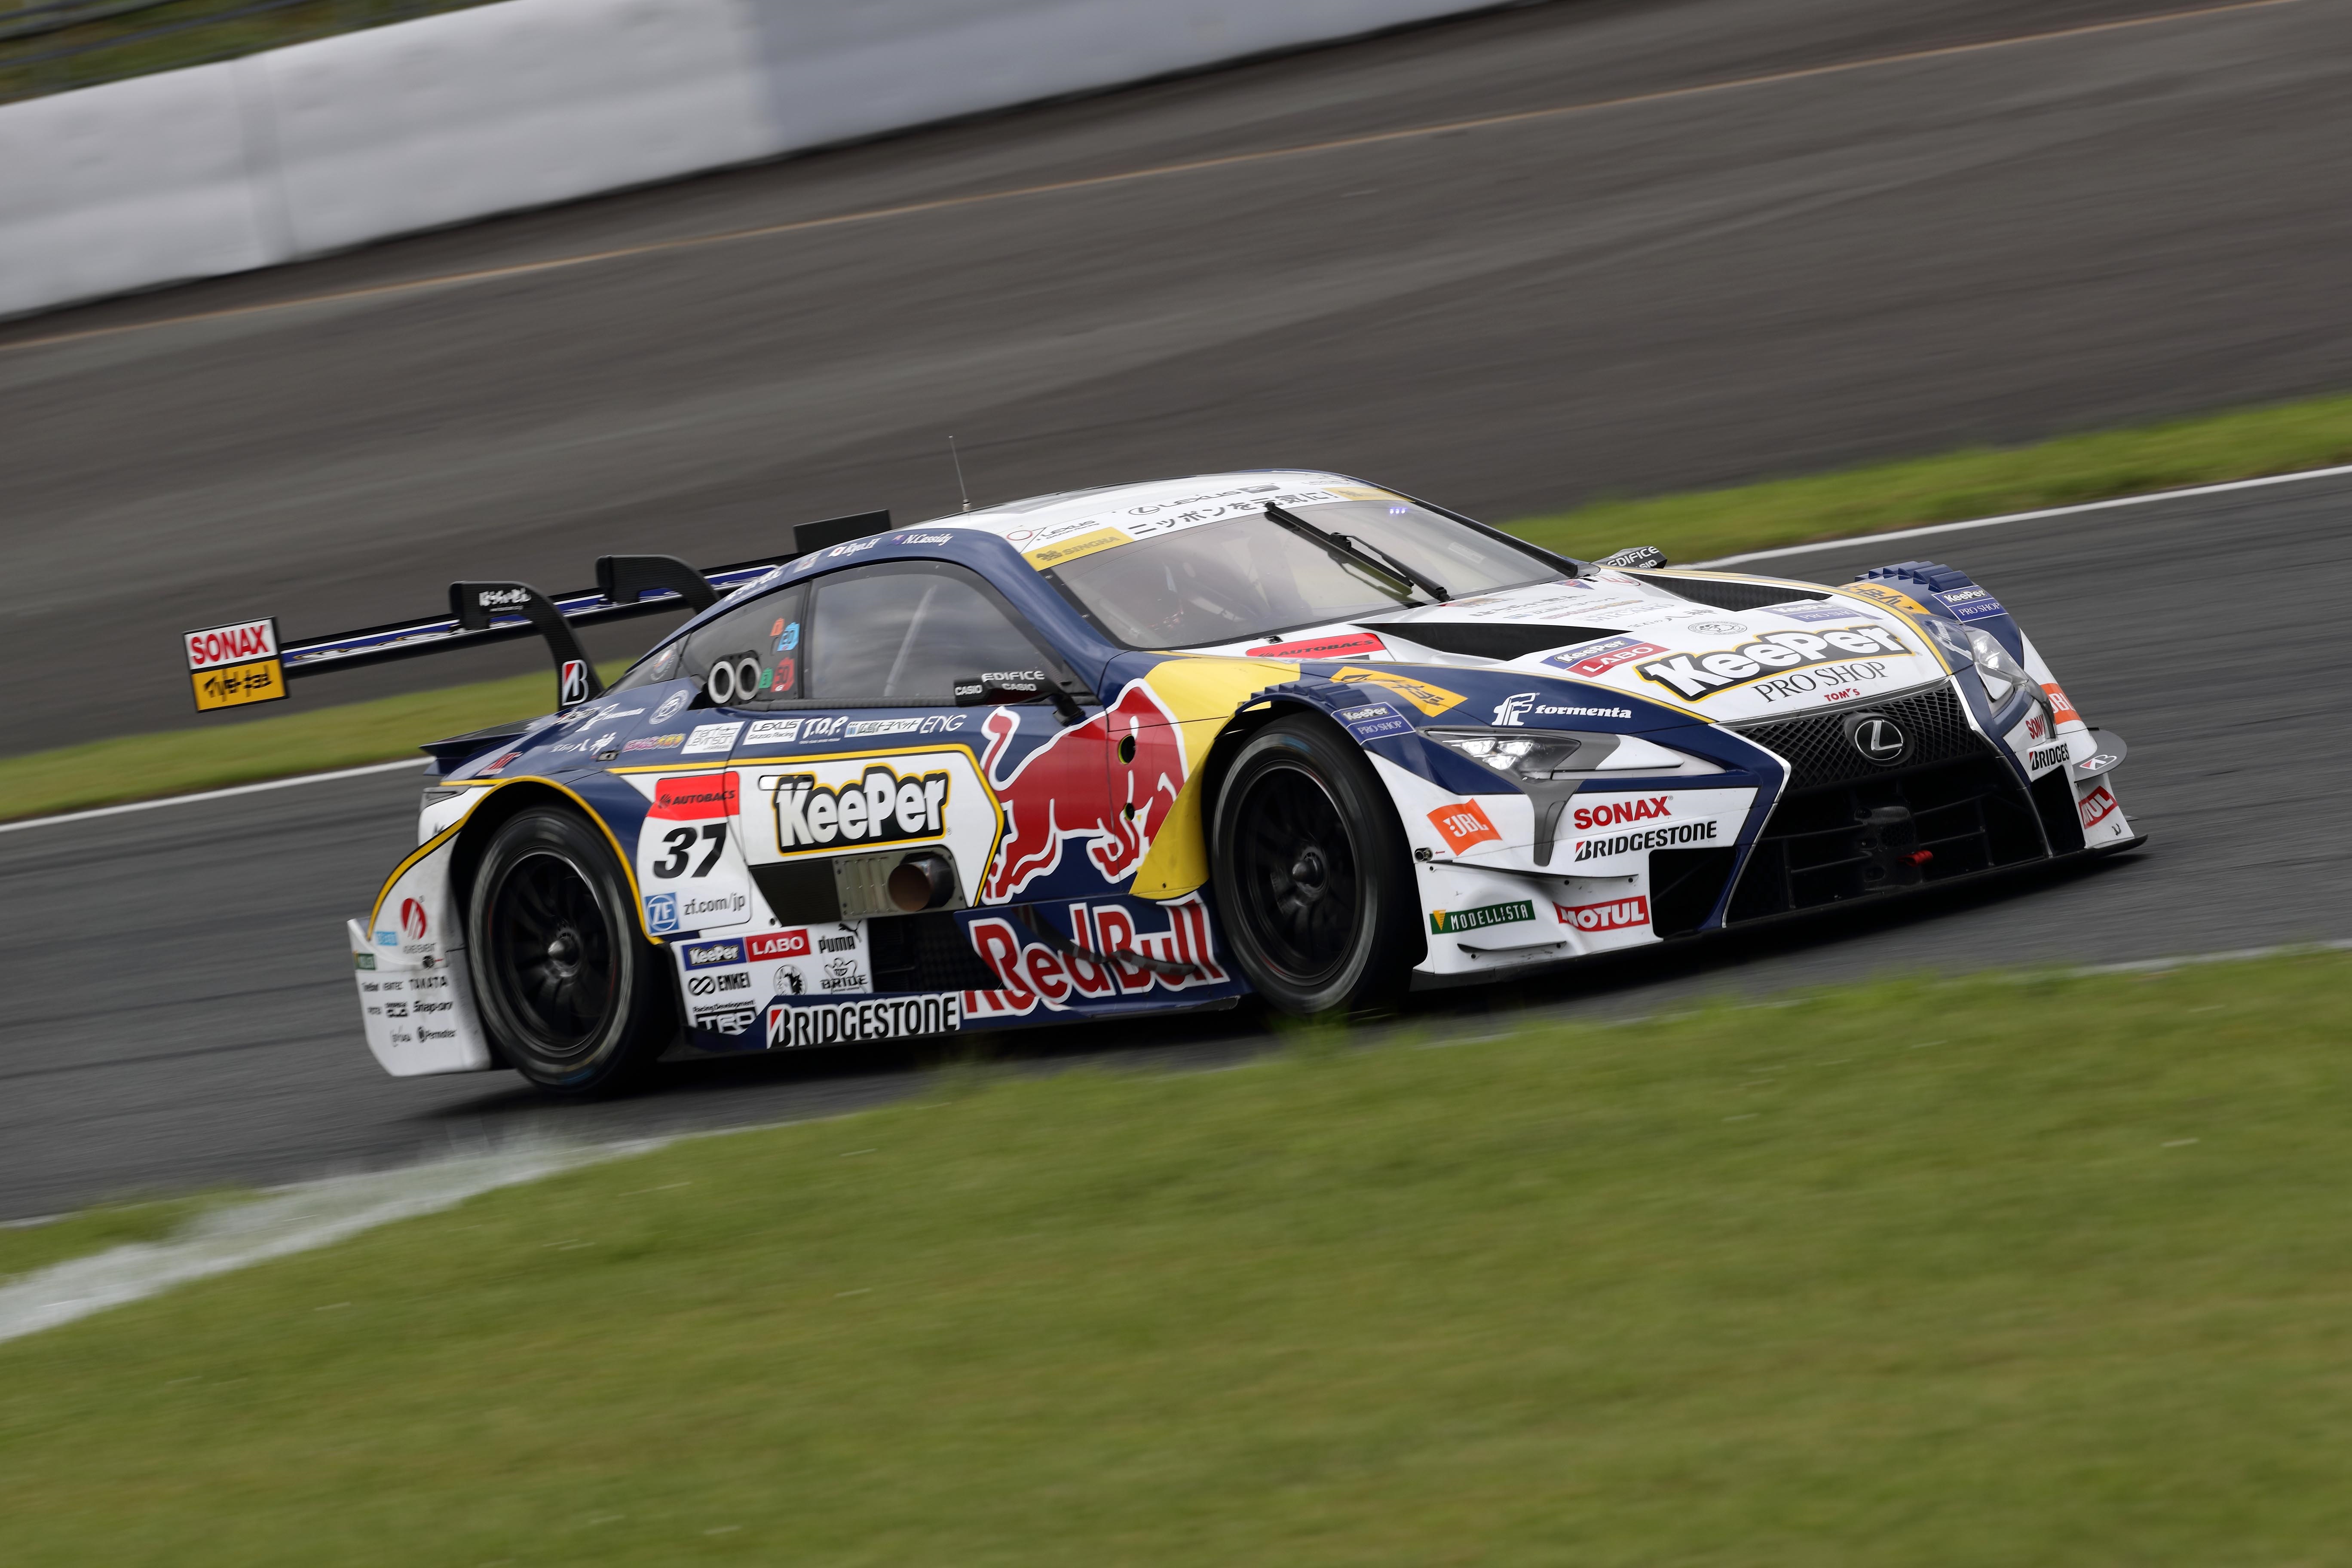 Cassidy right in contention in Japan’s SUPER GT series